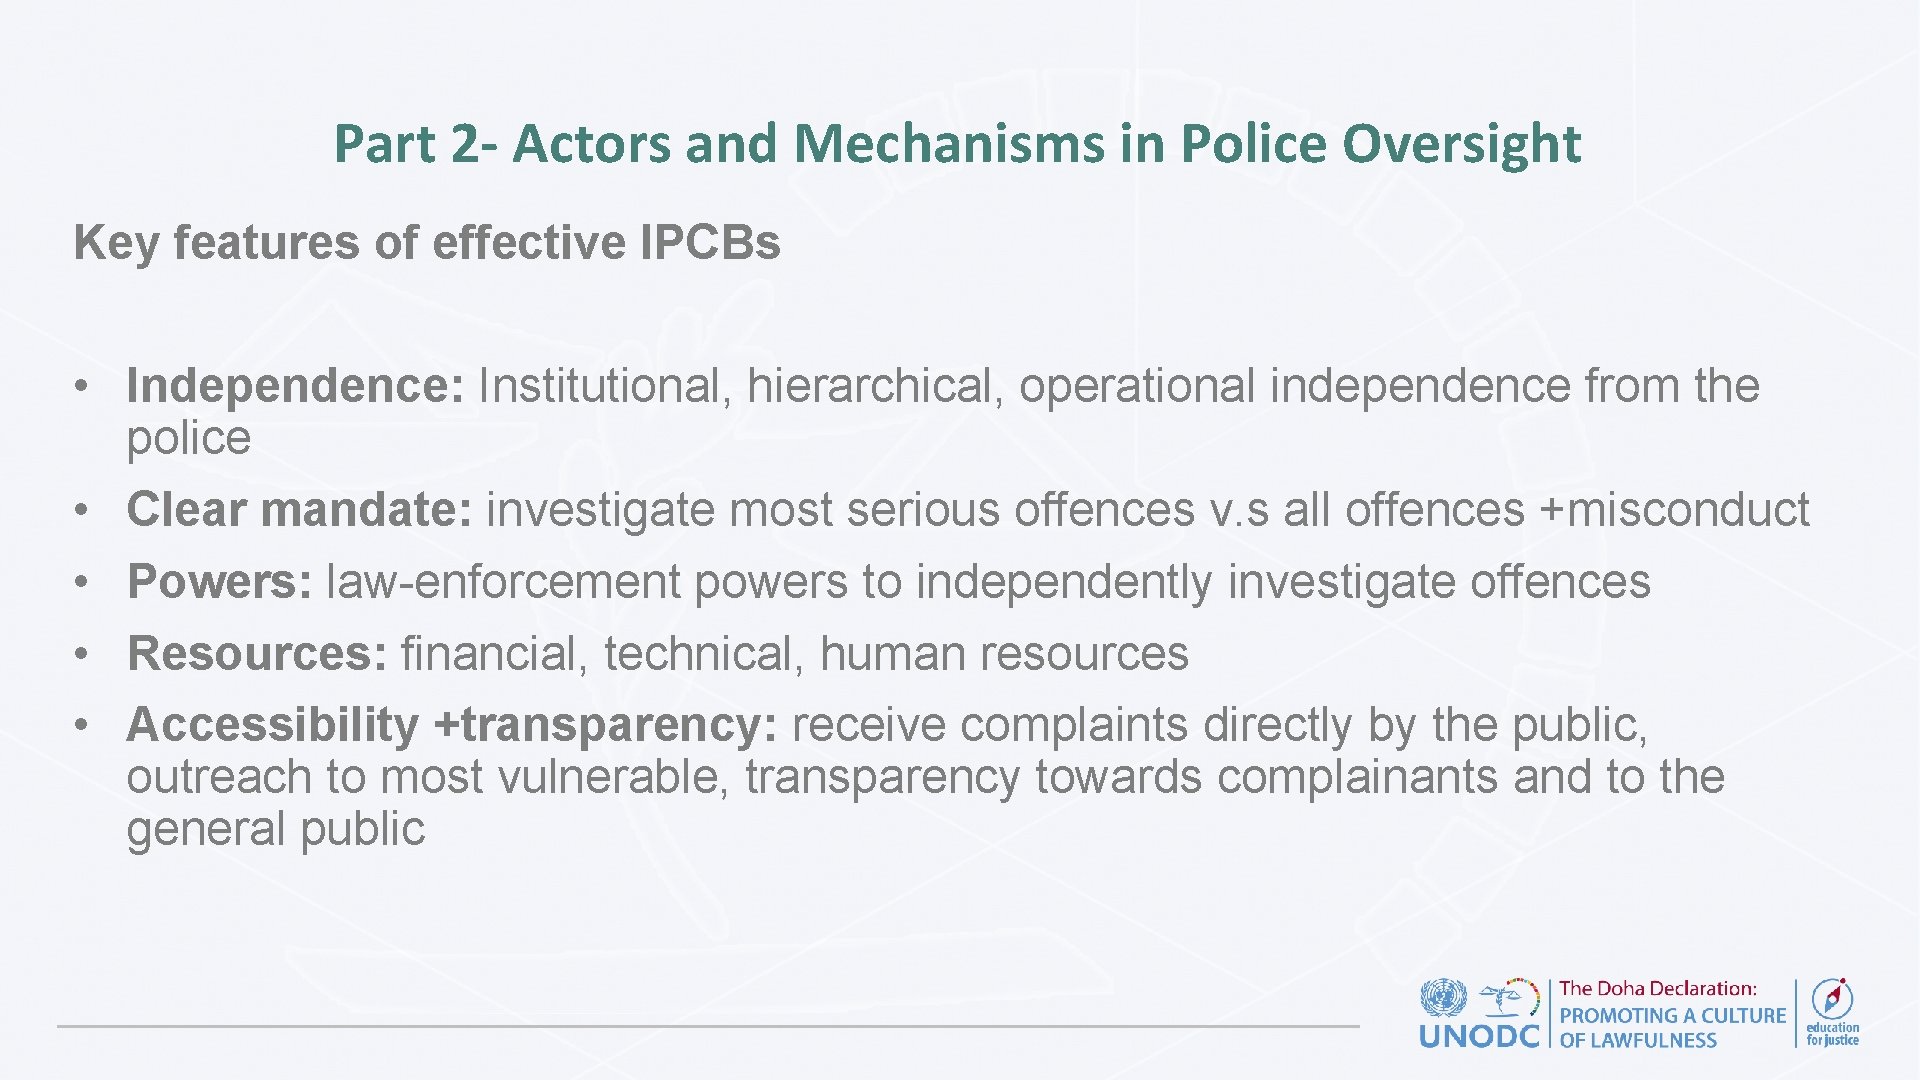 Part 2 - Actors and Mechanisms in Police Oversight Key features of effective IPCBs